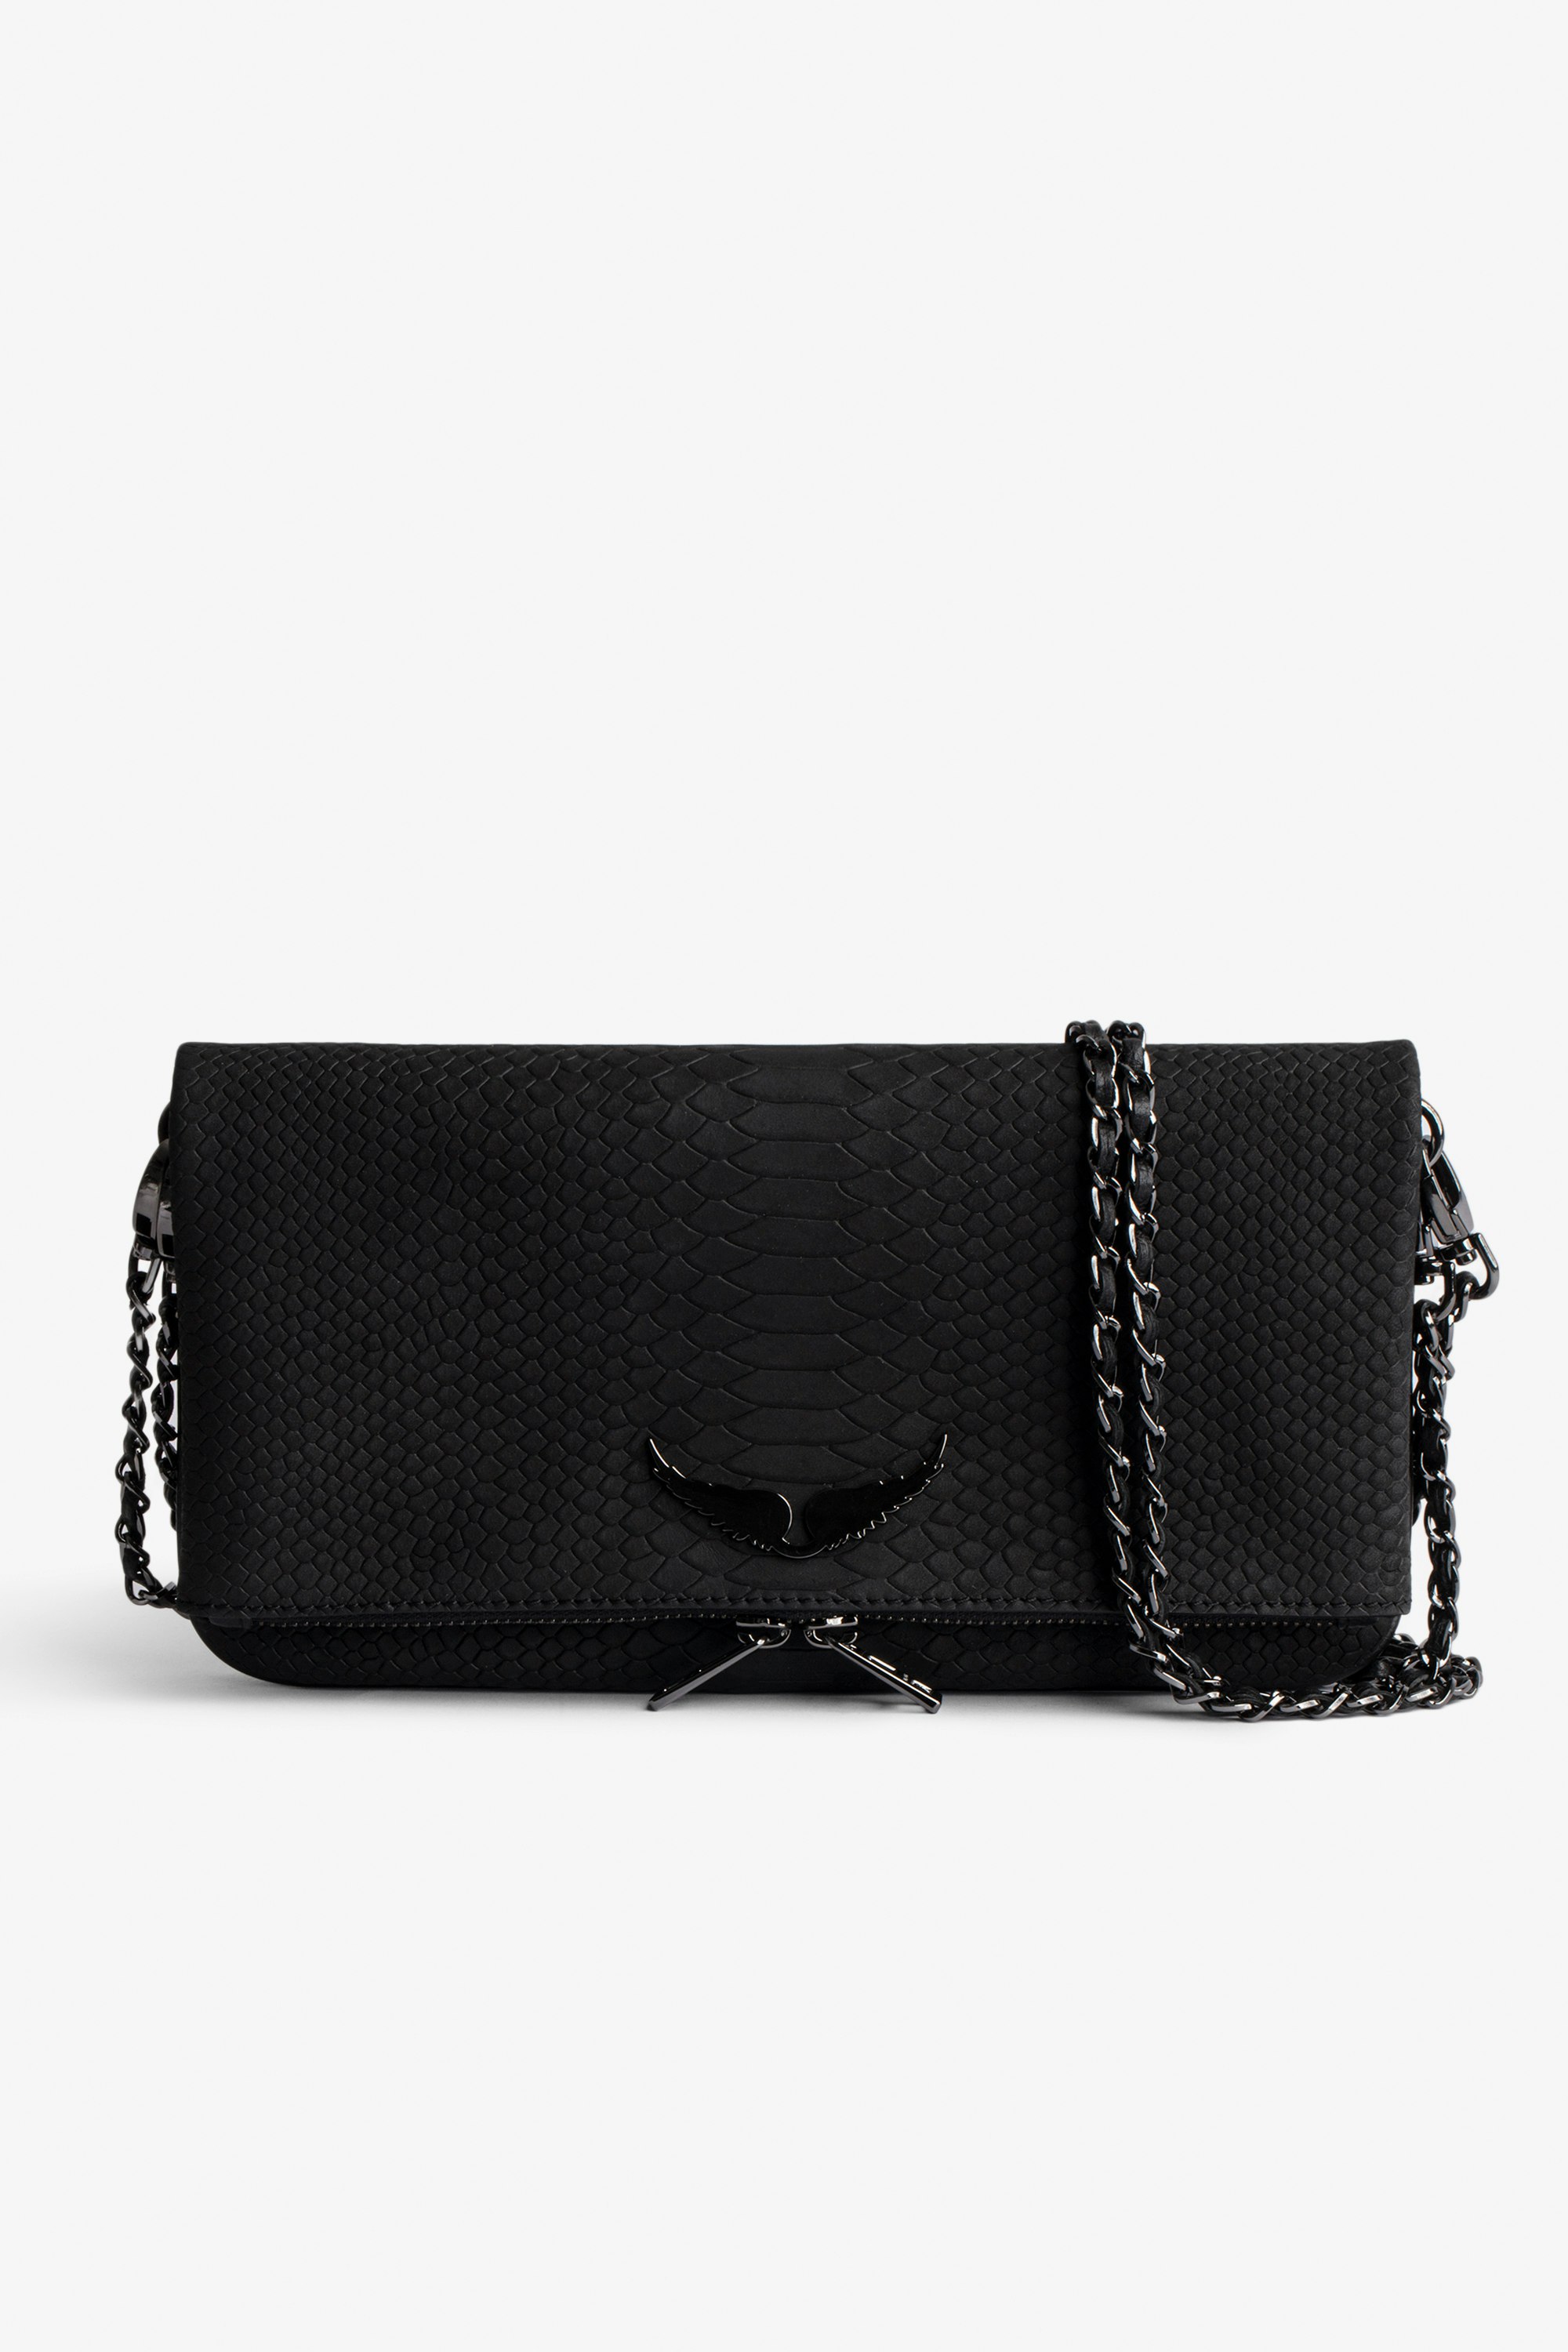 Rock Soft Savage Clutch - Women’s clutch in black python-effect leather with double leather-and-metal chain